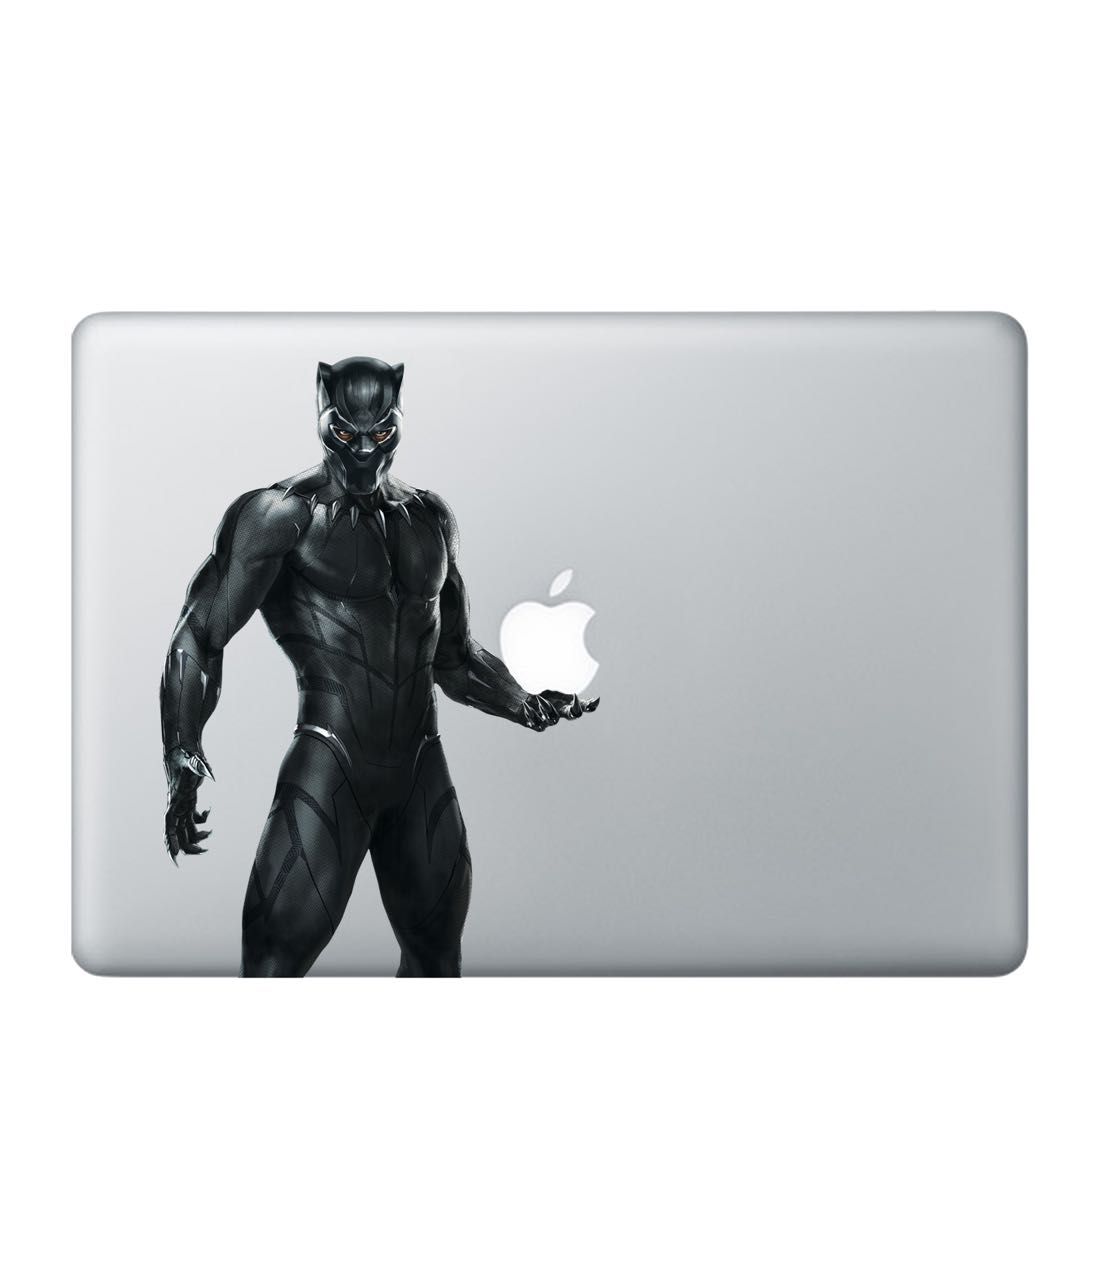 Marvel Black Panther Movie Warrior Poses Graphic png, sublim - Inspire  Uplift